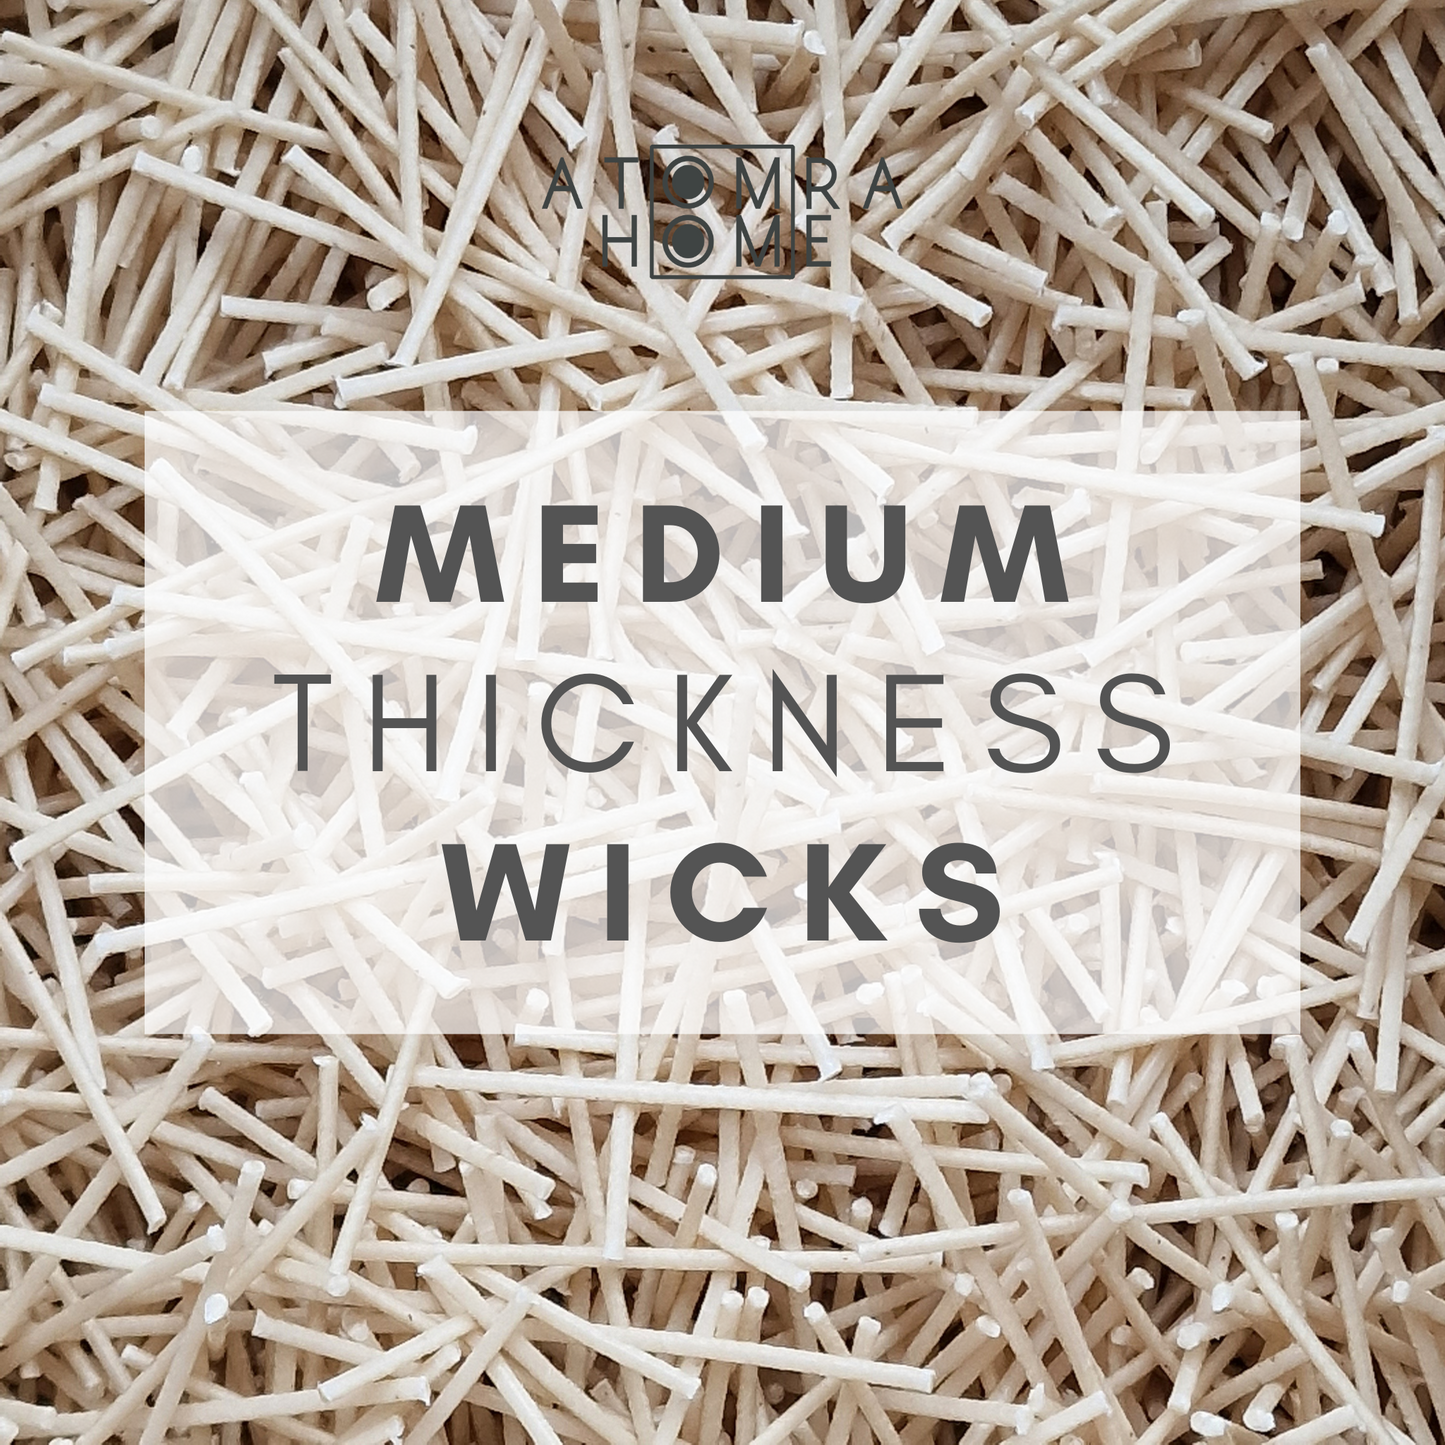 Medium Thickness Wicks for Candle Sand